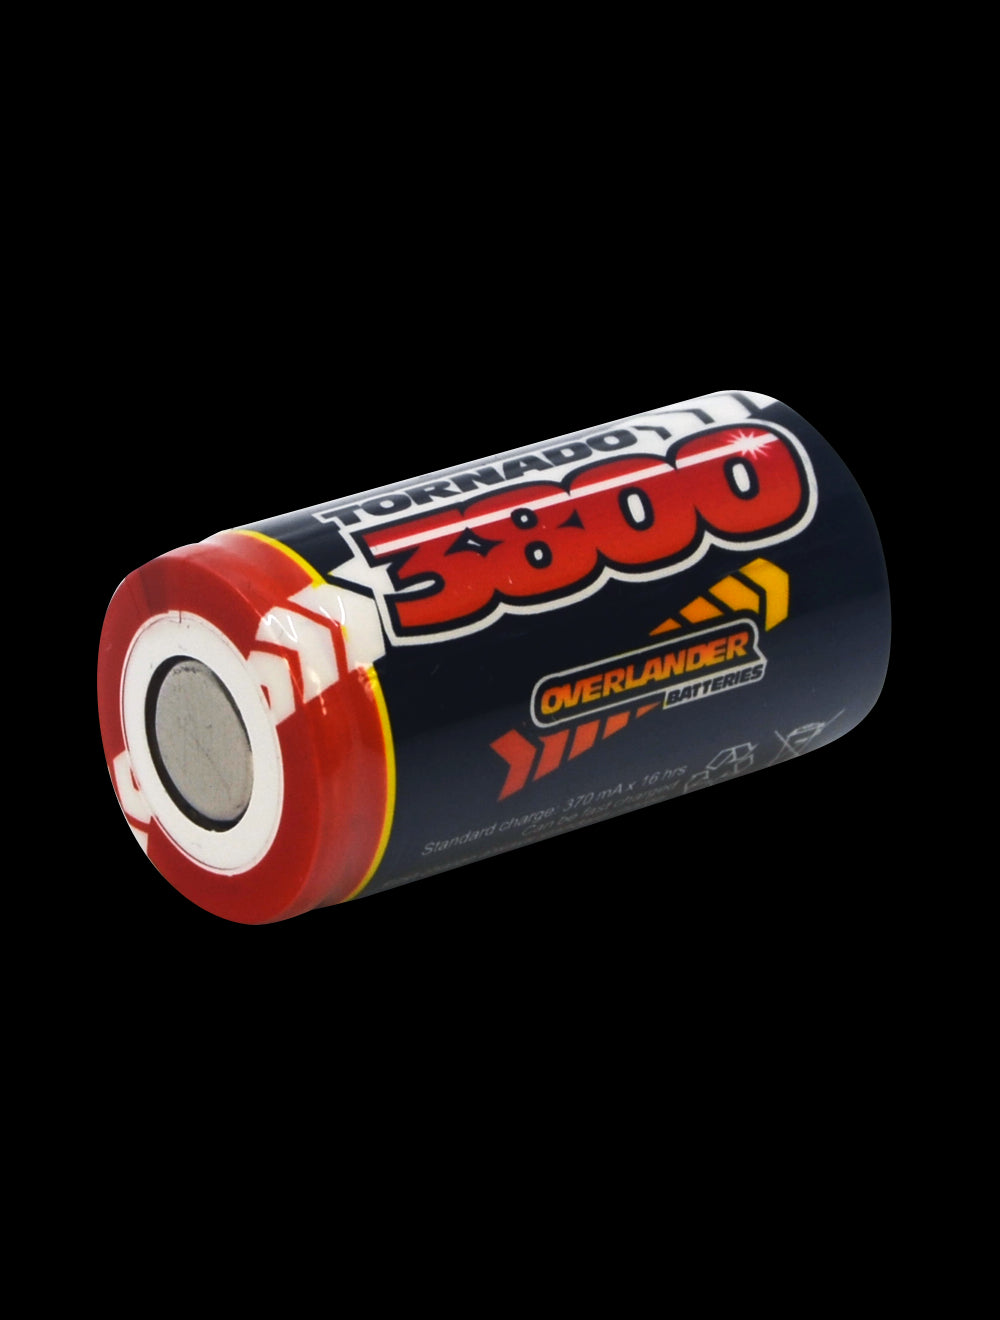 Overlander SubC 3800mAh 1.2V NiMH Cell - Tagged 1593